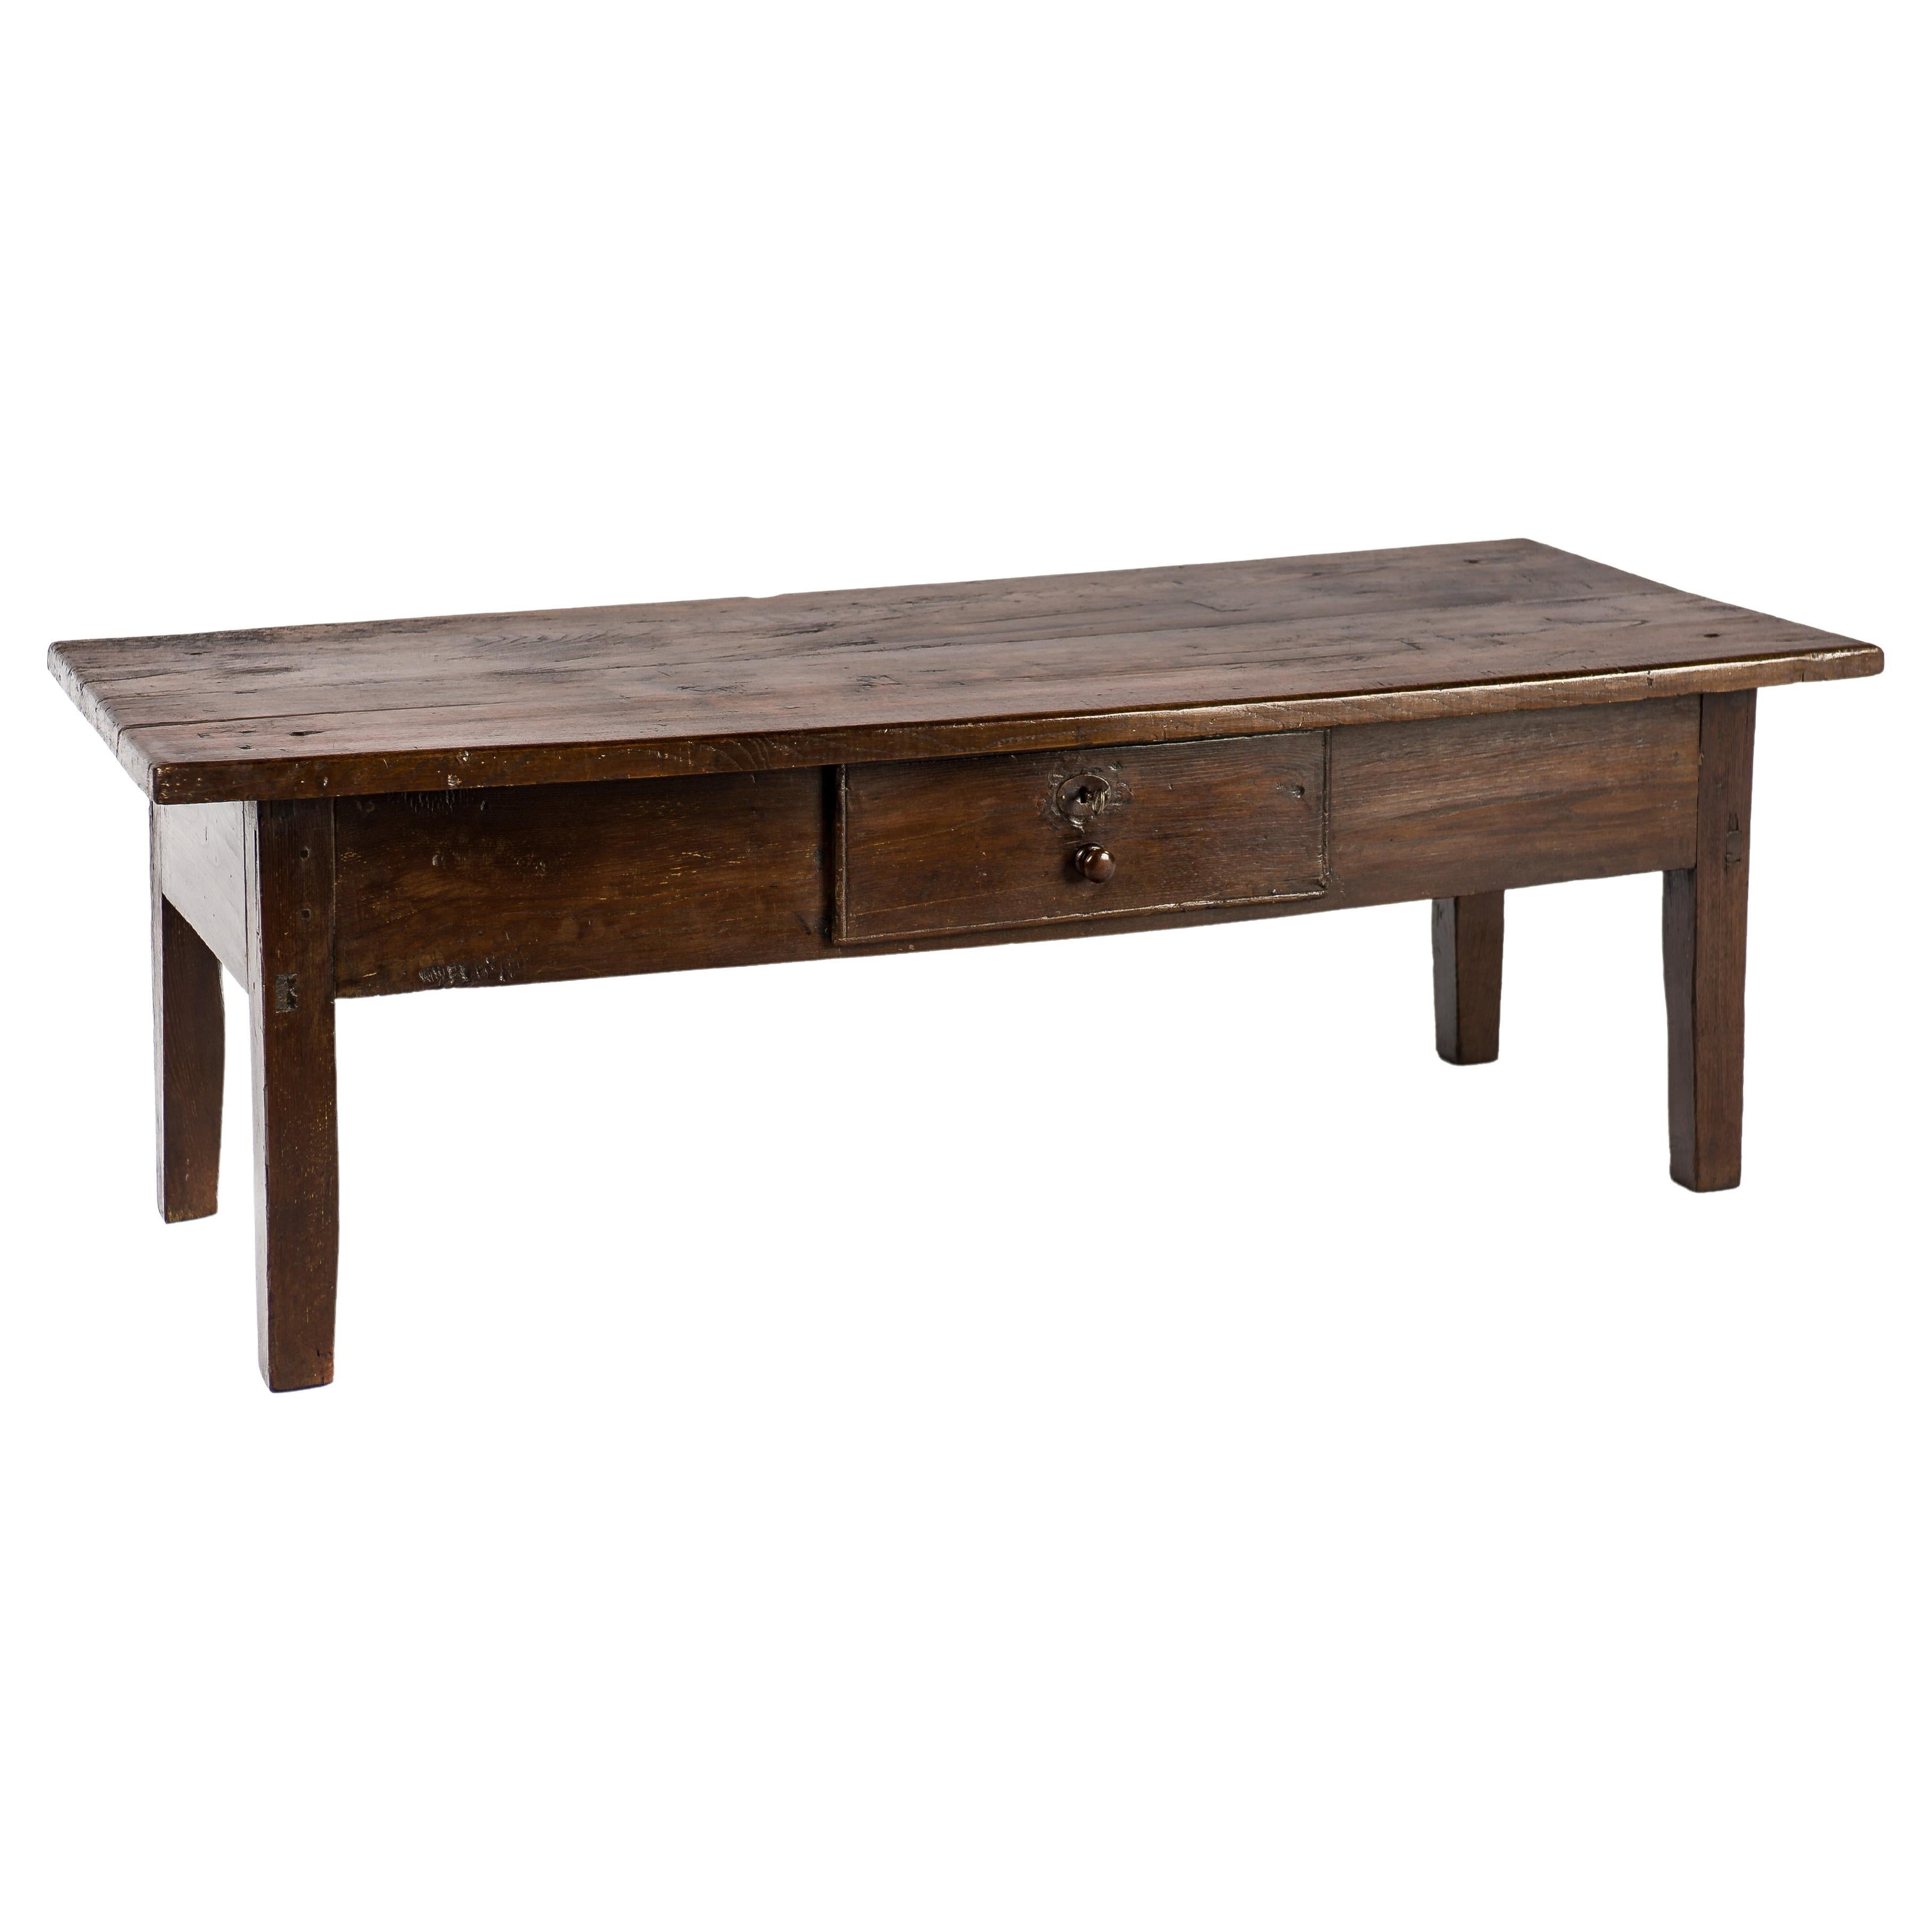 Antique Early 19th-Century Rustic Spanish Warm Brown Chestnut Coffee Table For Sale